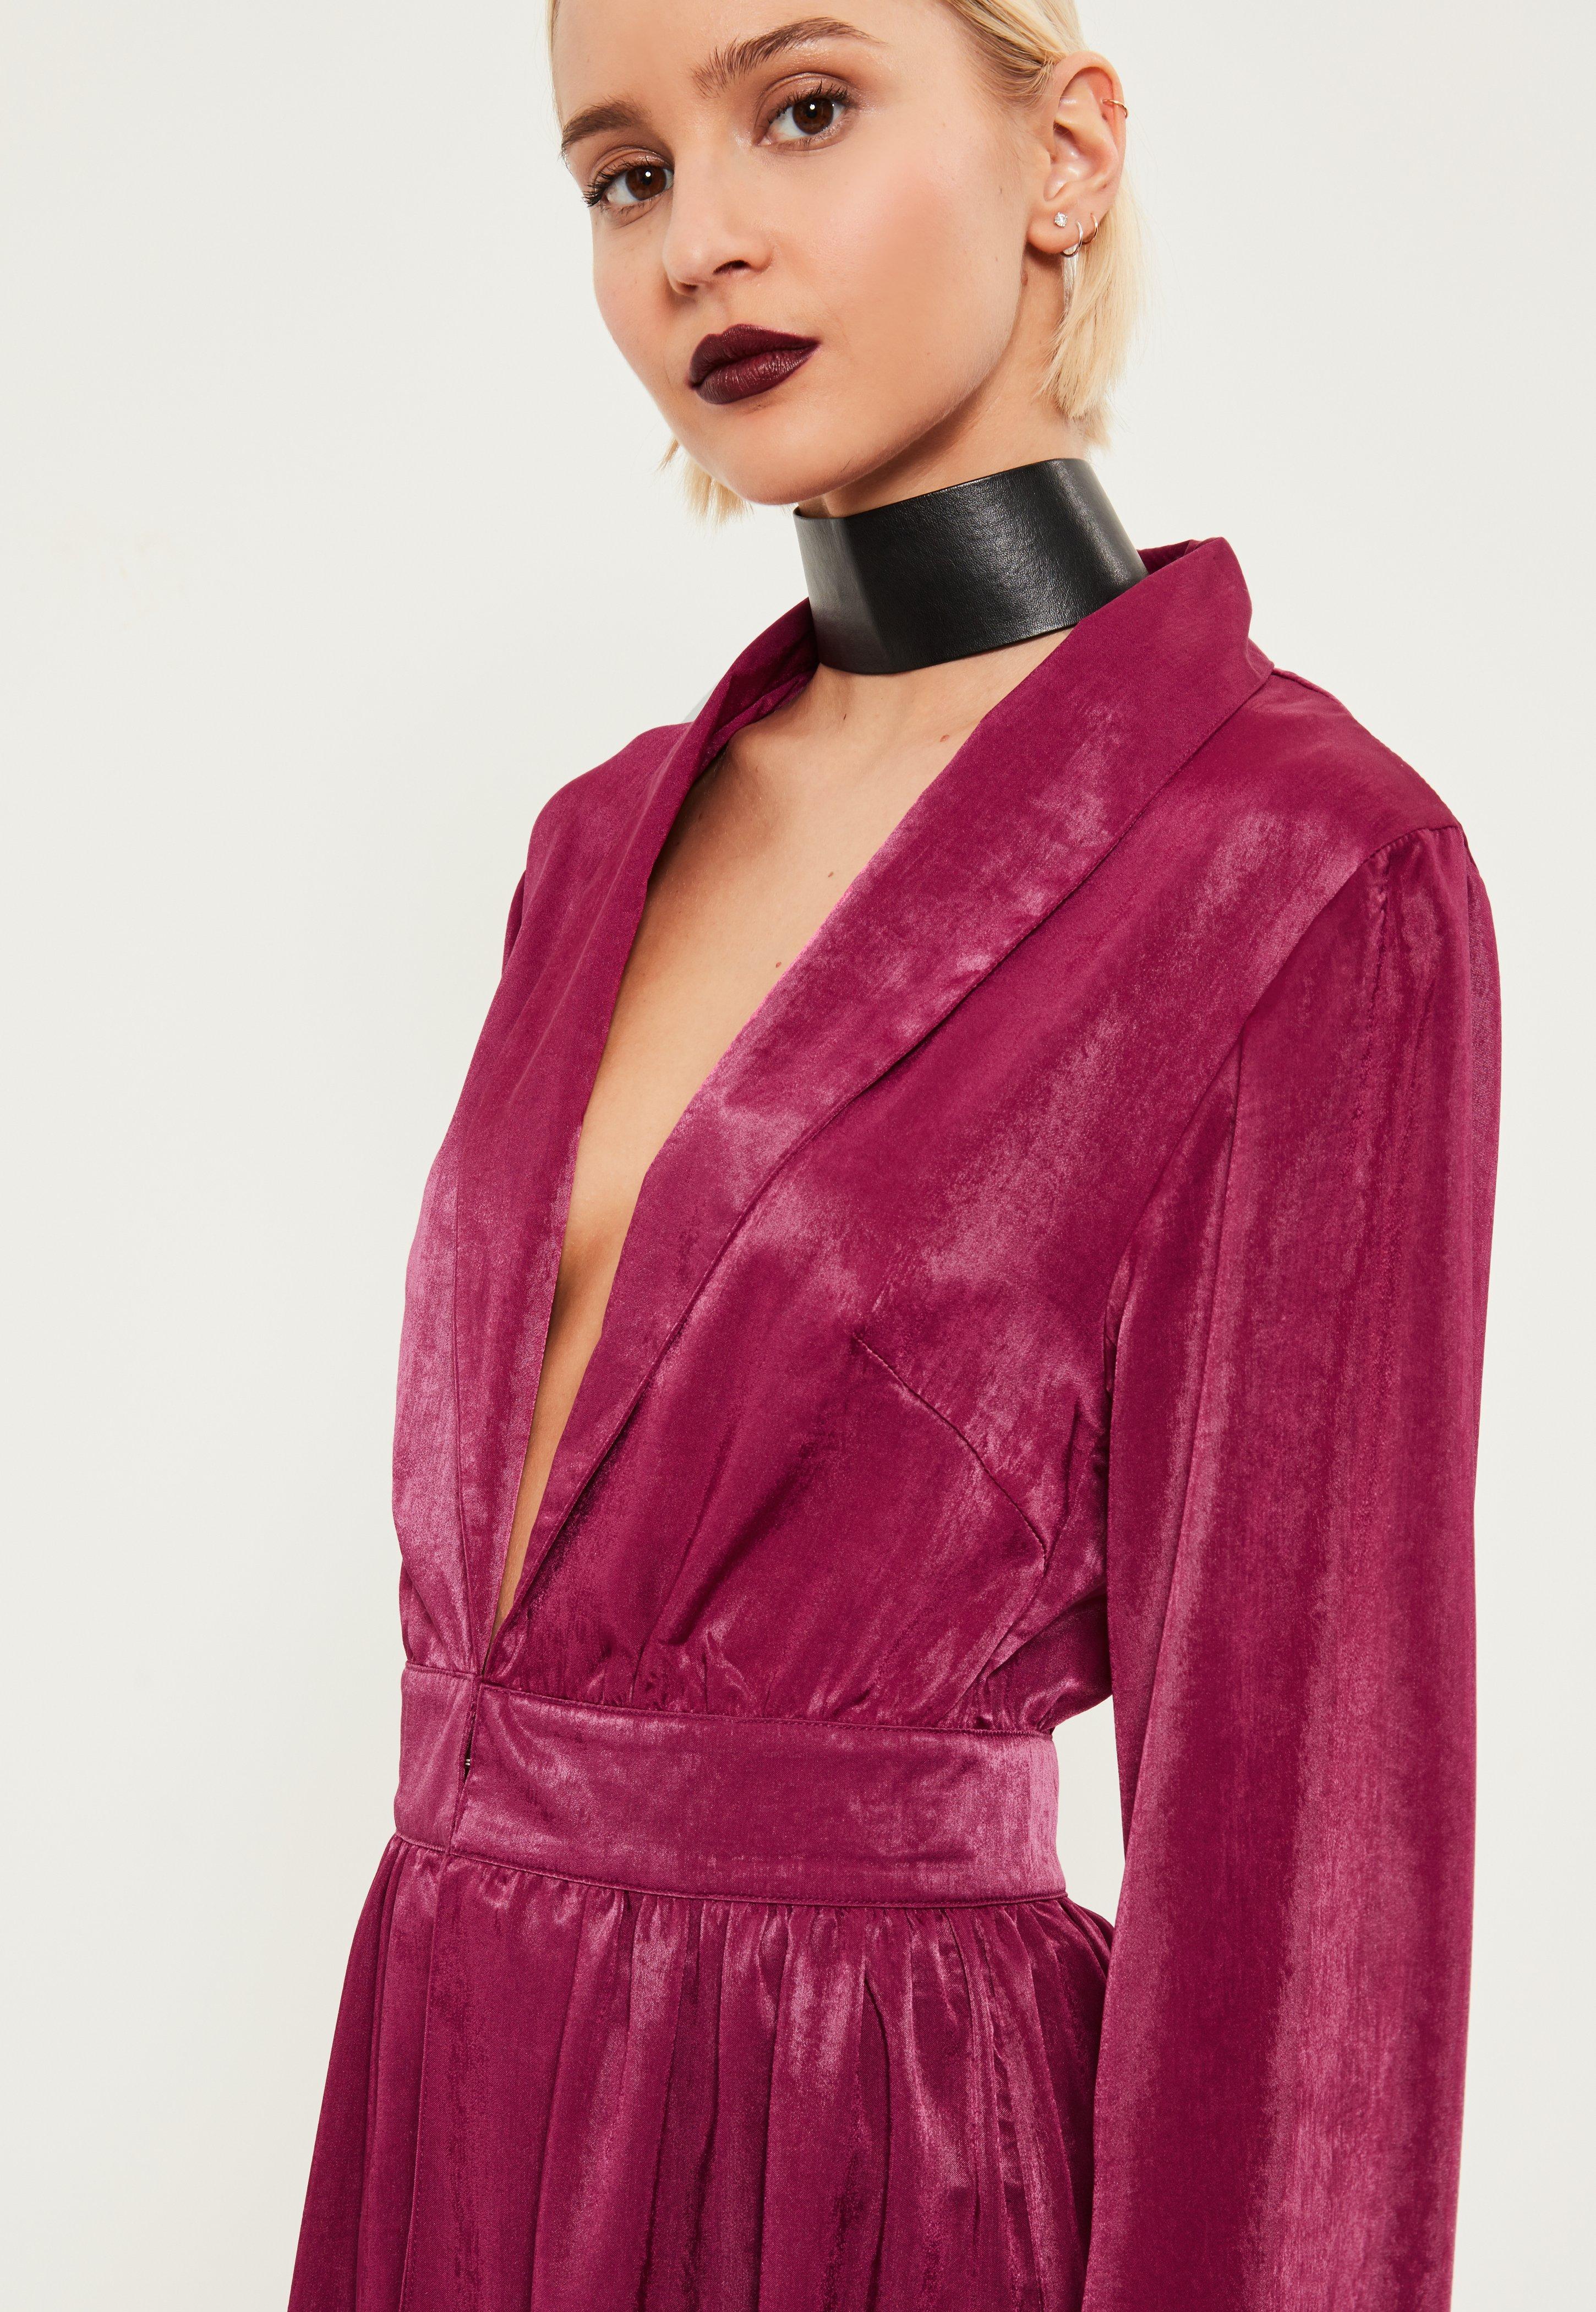 Lyst - Missguided Pink Crushed Satin Waist Detail Duster Coat in Pink